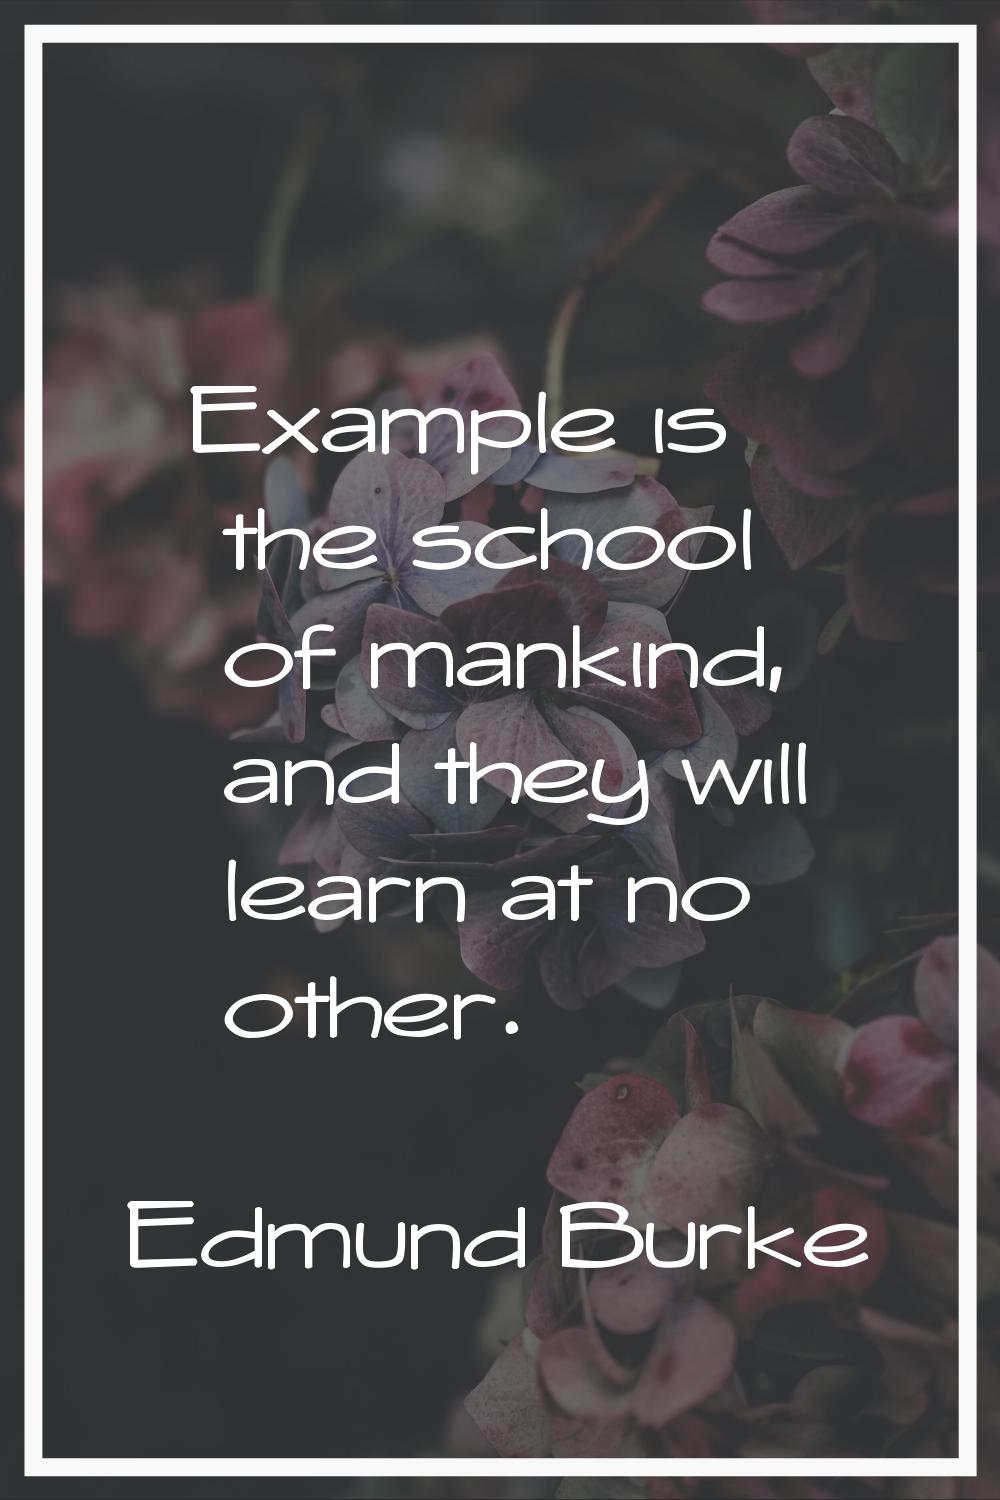 Example is the school of mankind, and they will learn at no other.